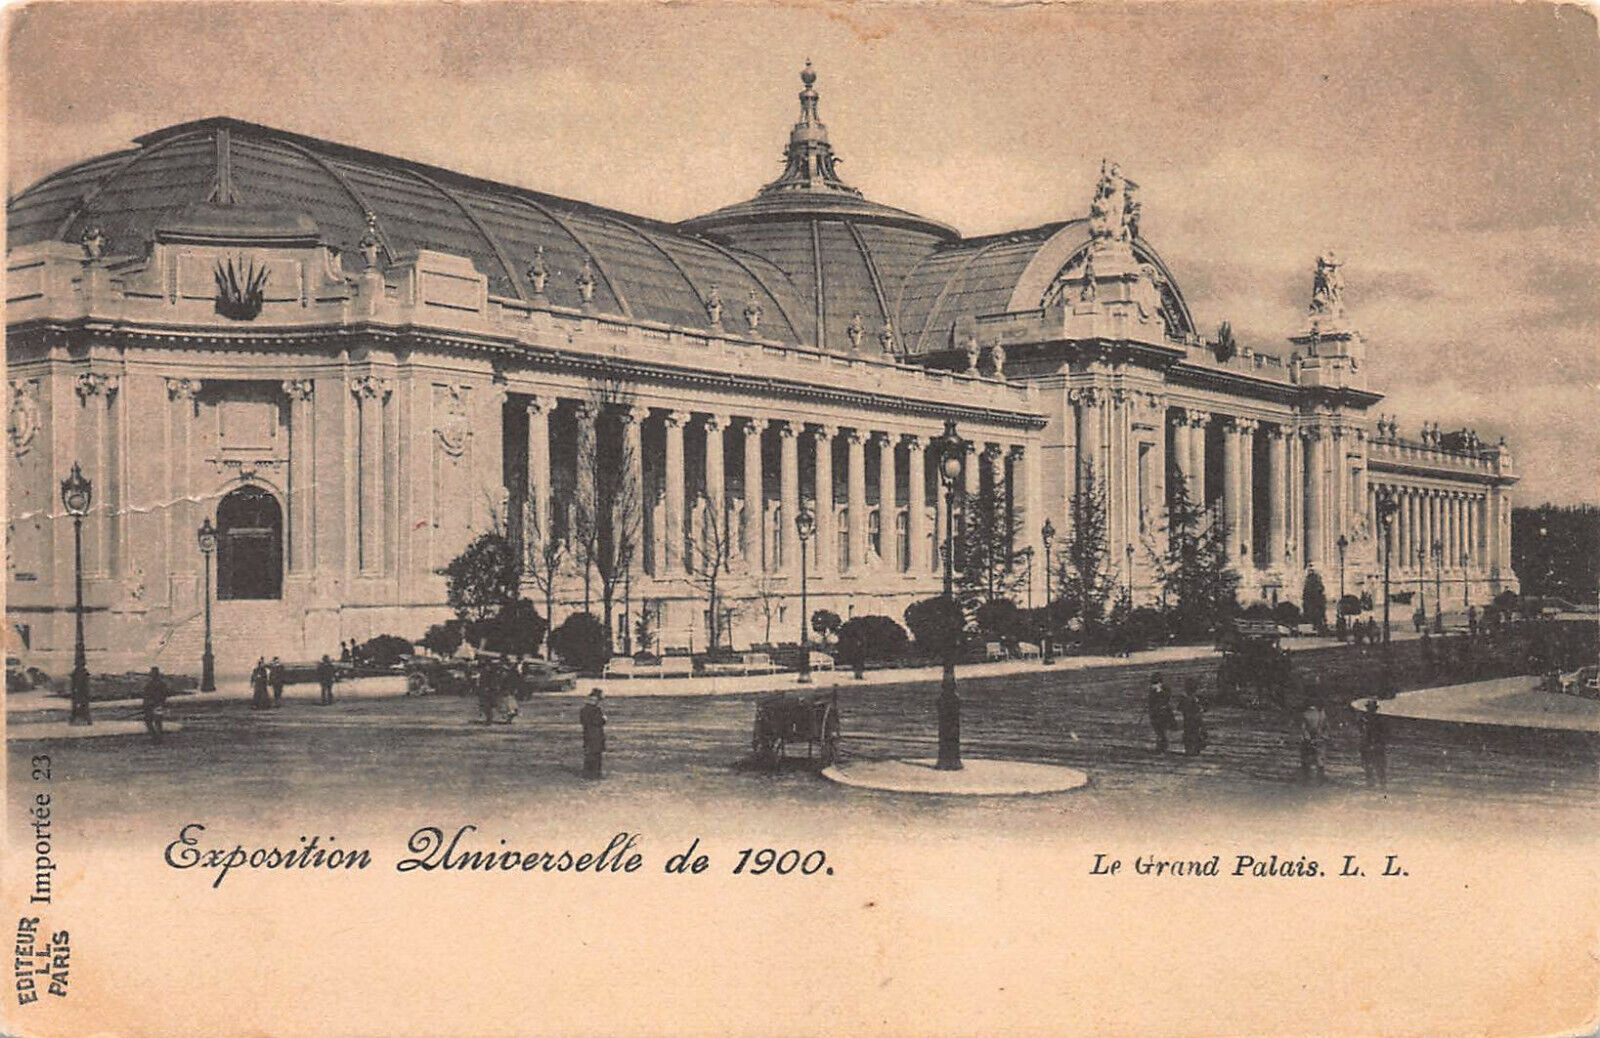 The Grand Palace, Universal Exposition of 1900, Paris, France, Unused Postcard